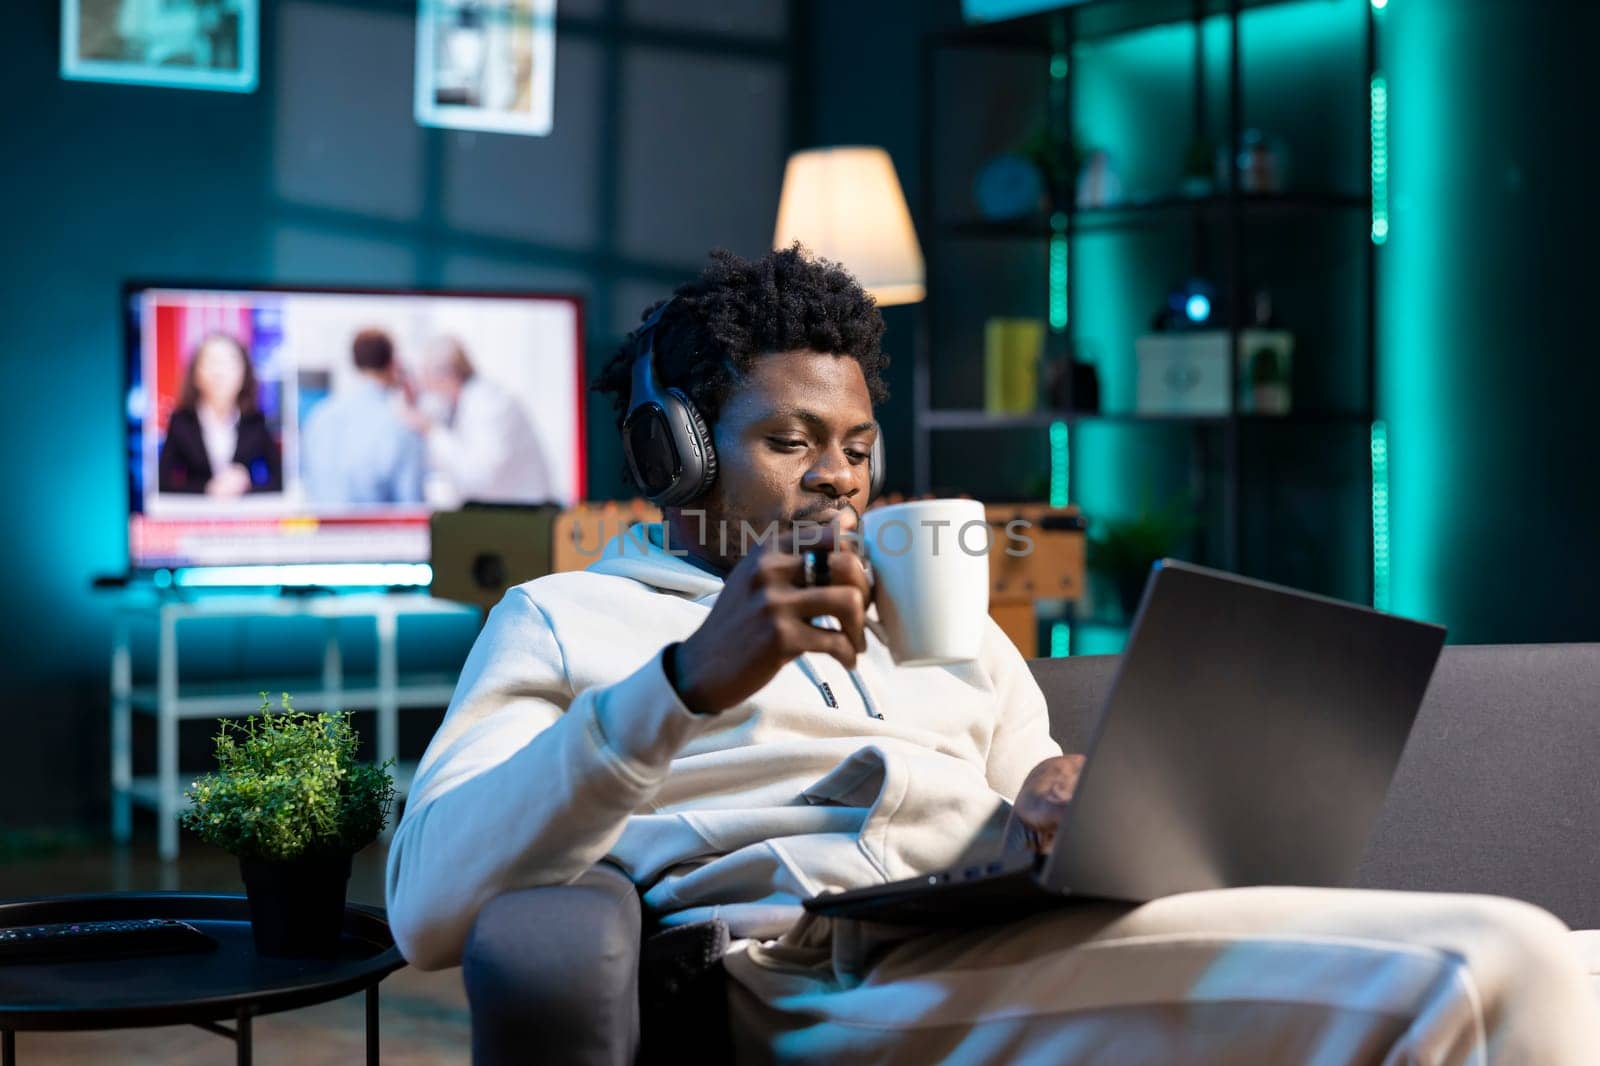 Happy man drinking coffee and writing emails at home office desk while listening music. Smiling remote worker doing b2b networking over internet, wearing headphones, enjoying hot beverage